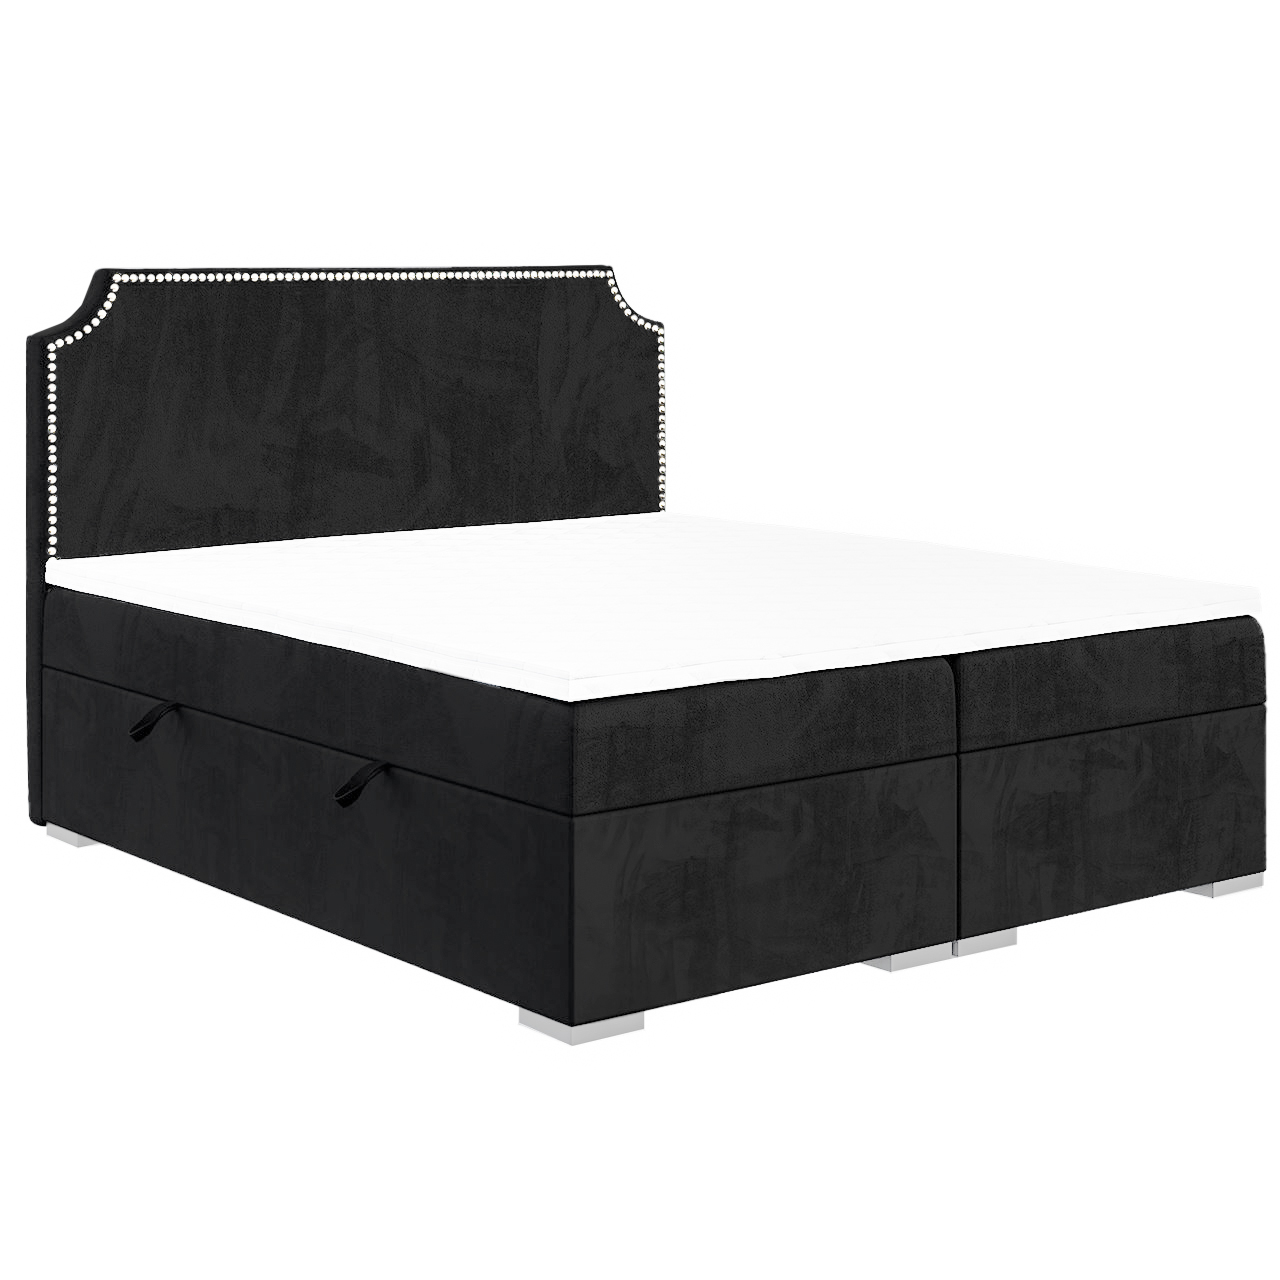 Upholstered bed LINA 160x200 riviera 100